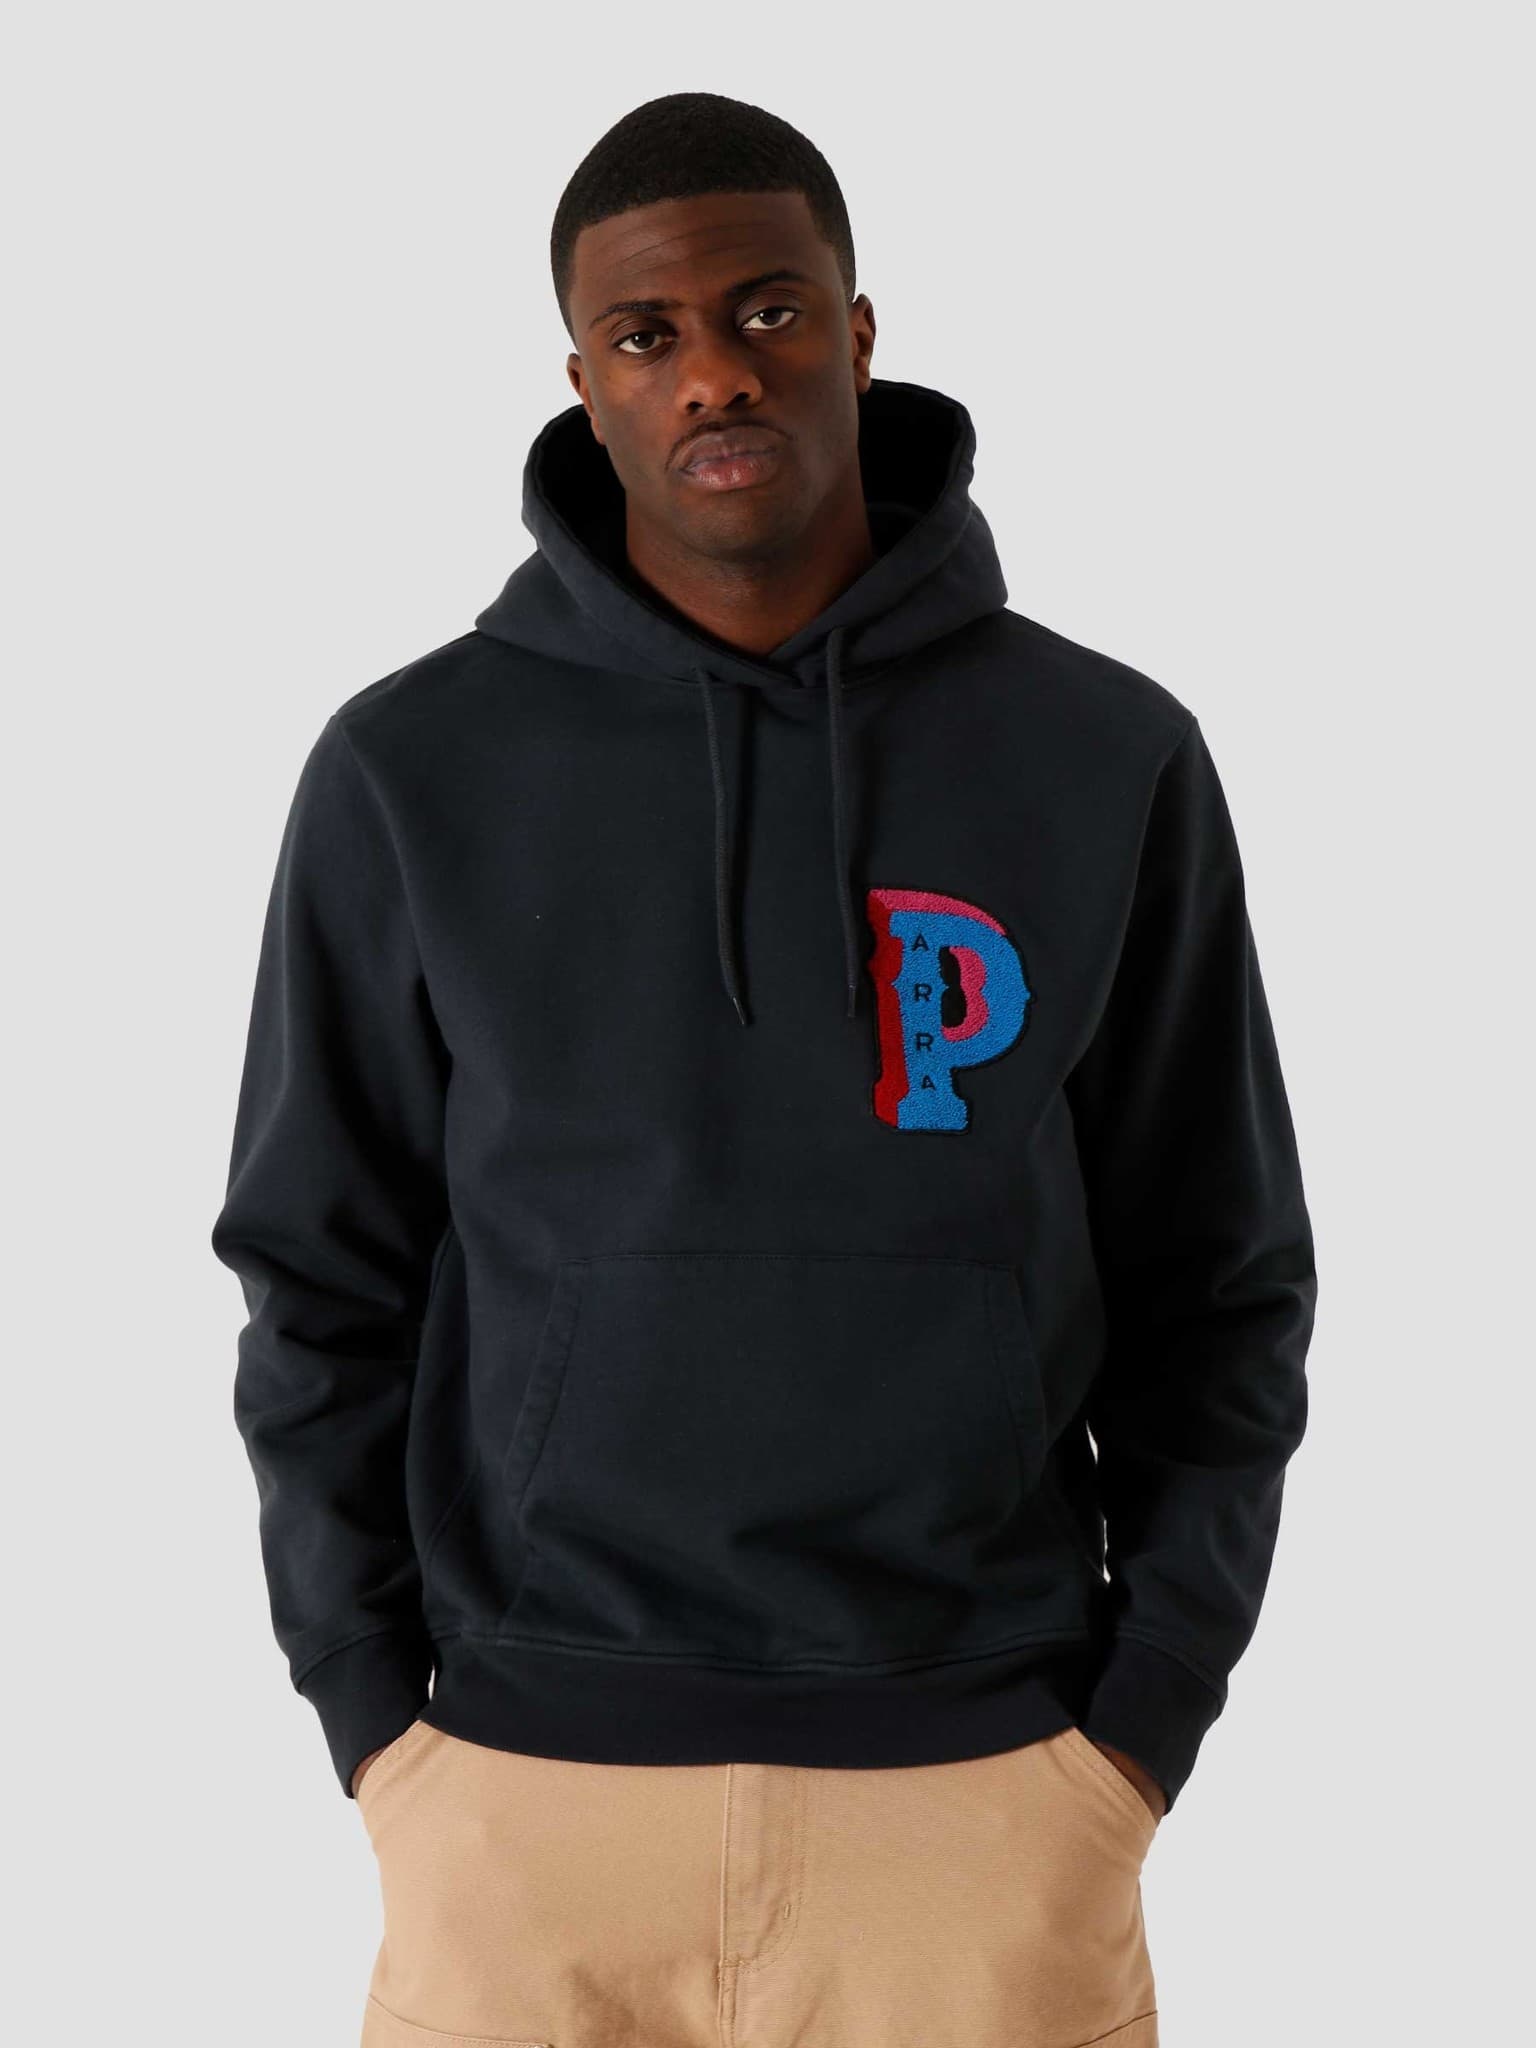 Dropped Out Hooded Sweatshirt Navy Blue 45080